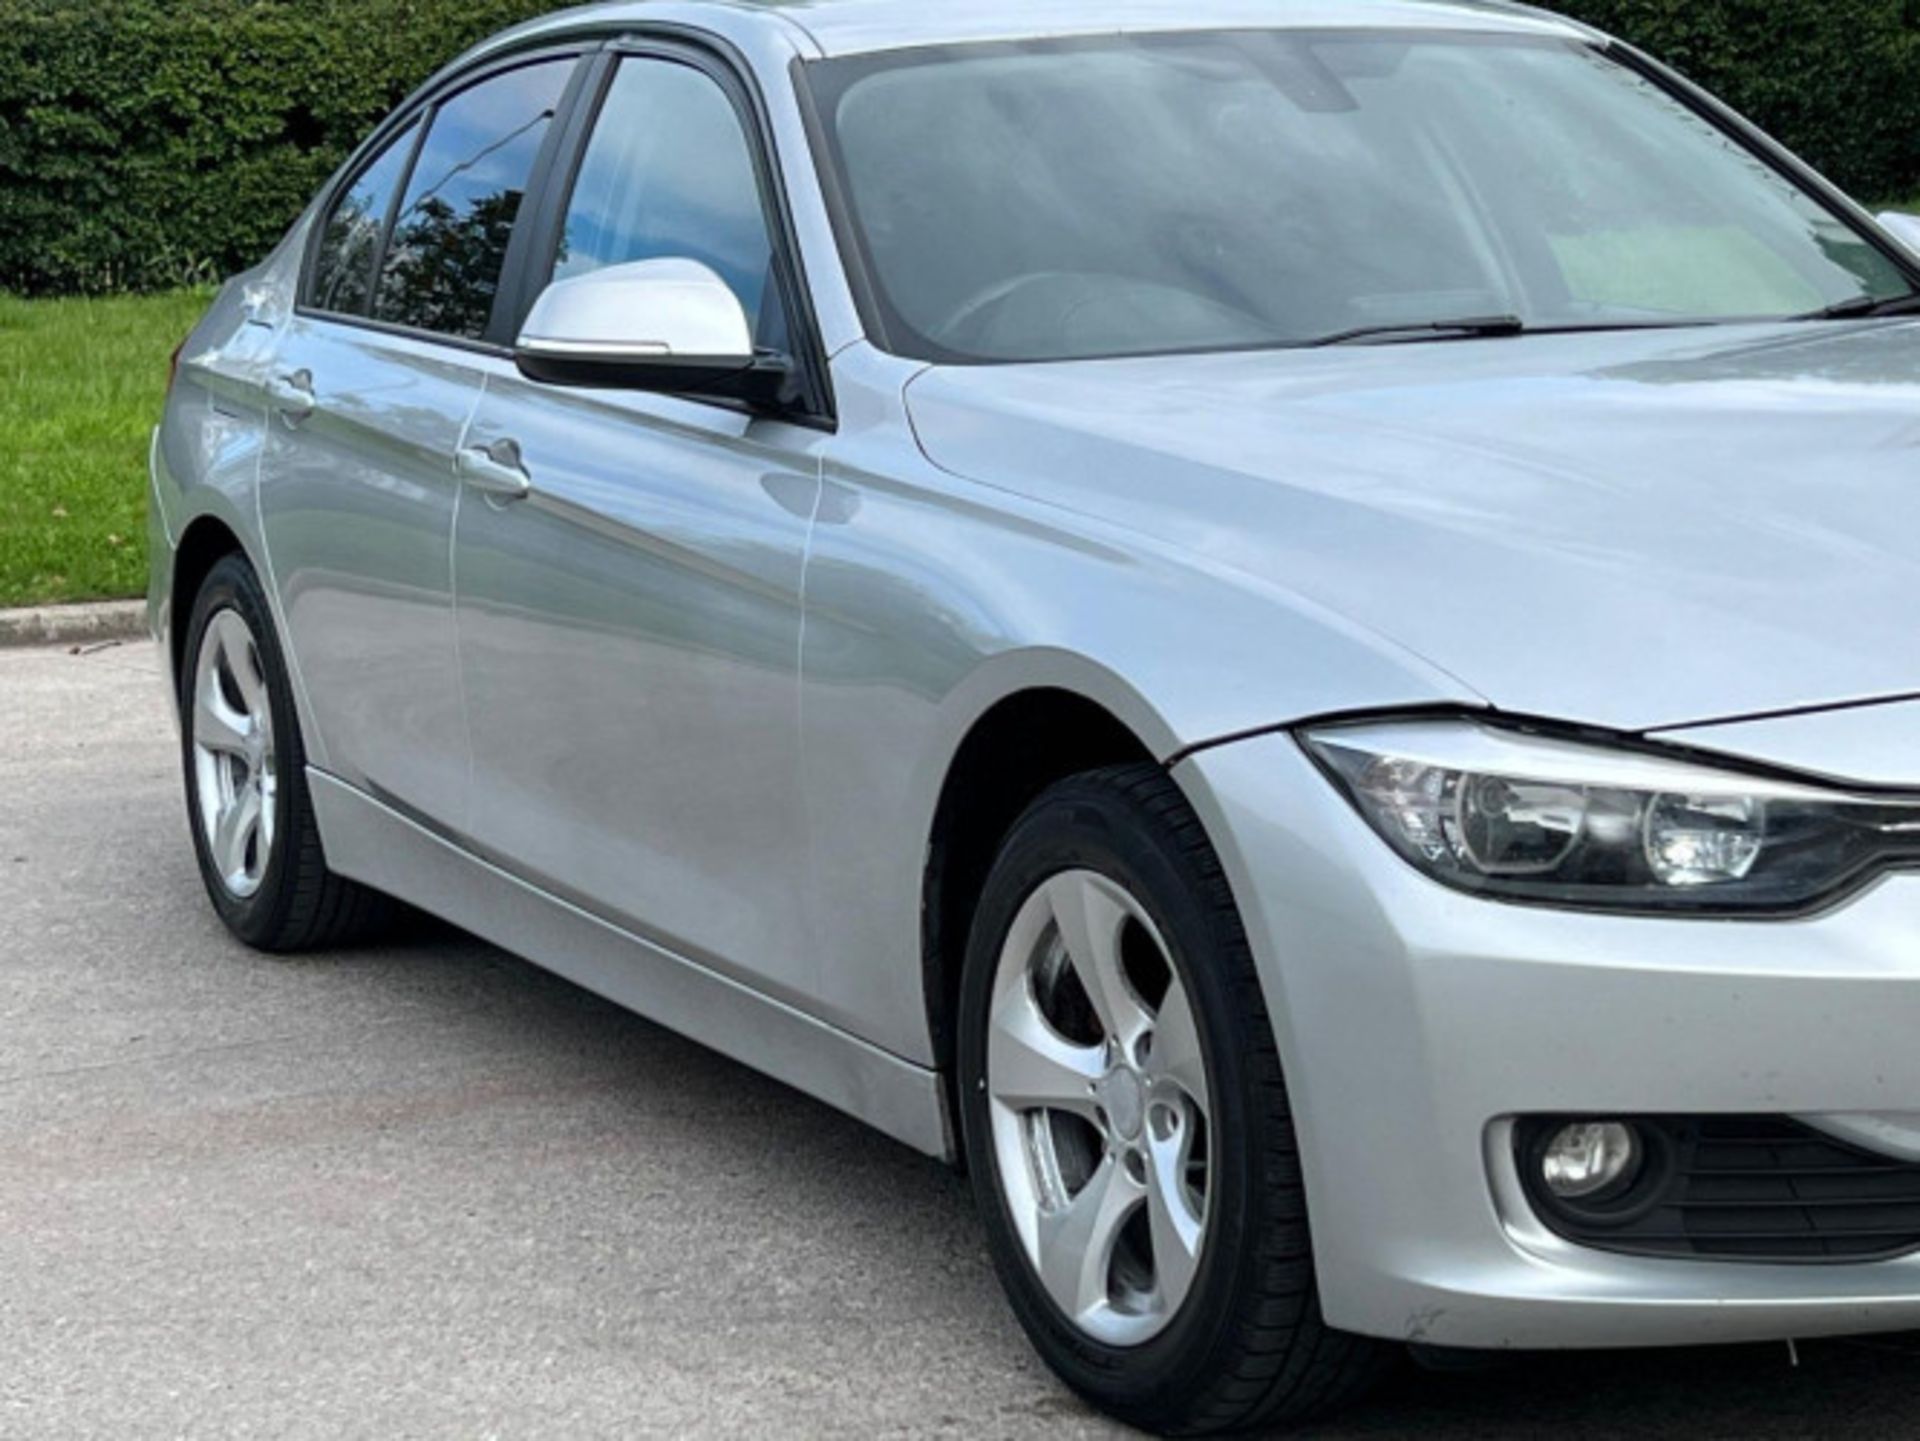 BMW 3 SERIES 2.0 DIESEL ED START STOP - A WELL-MAINTAINED GEM >>--NO VAT ON HAMMER--<< - Image 220 of 229